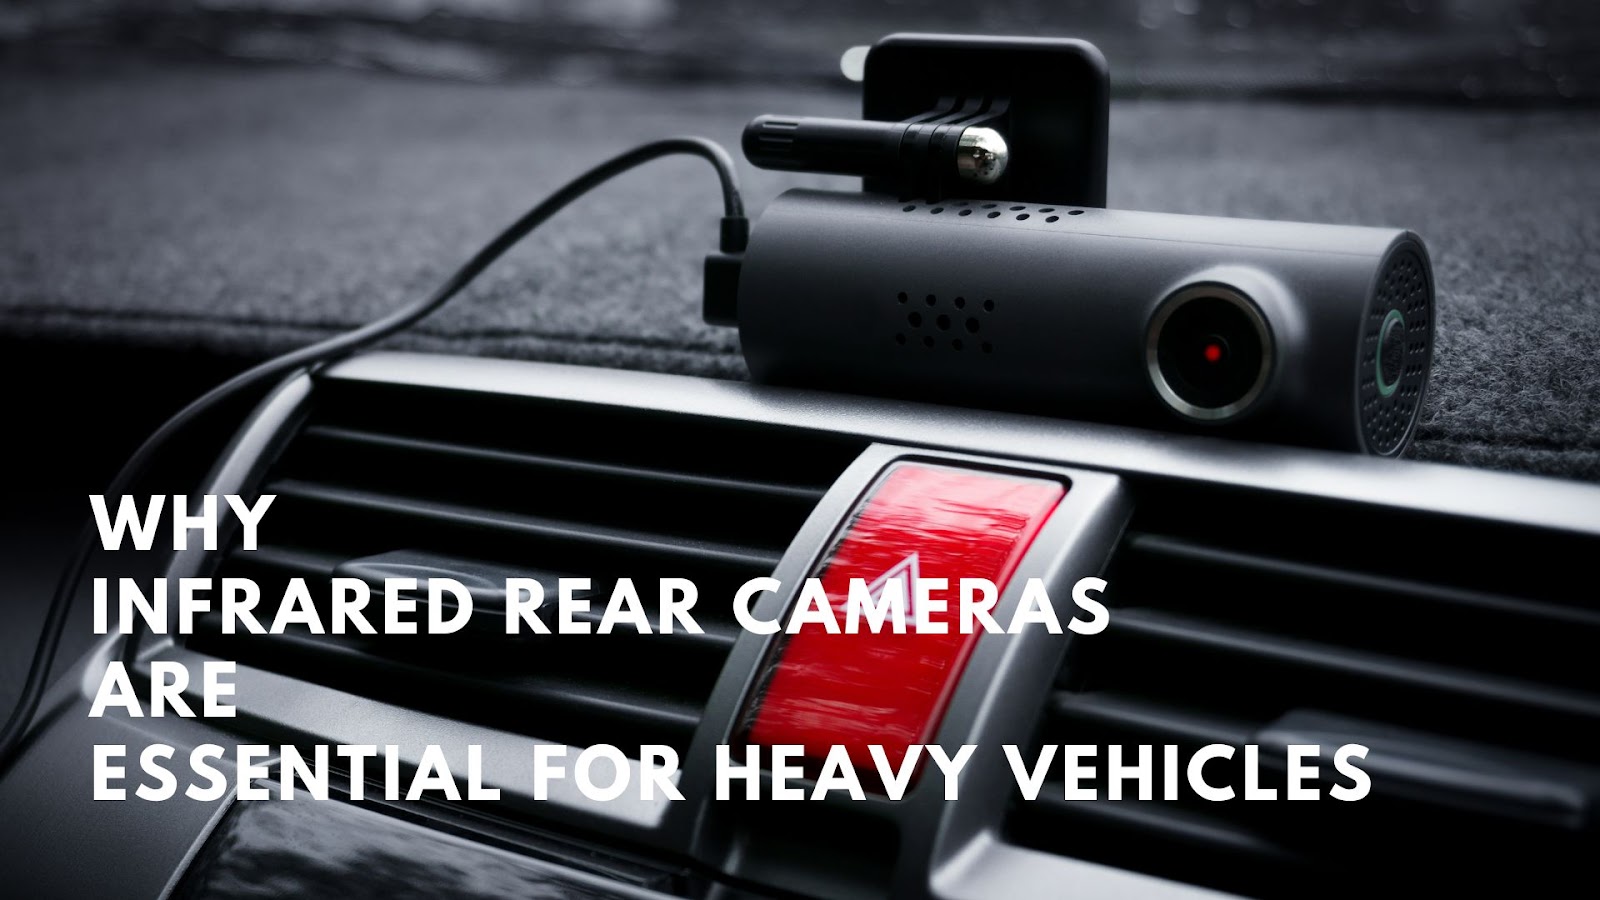 5 Reasons Infrared Rear Cameras Are Essential for Heavy Vehicles